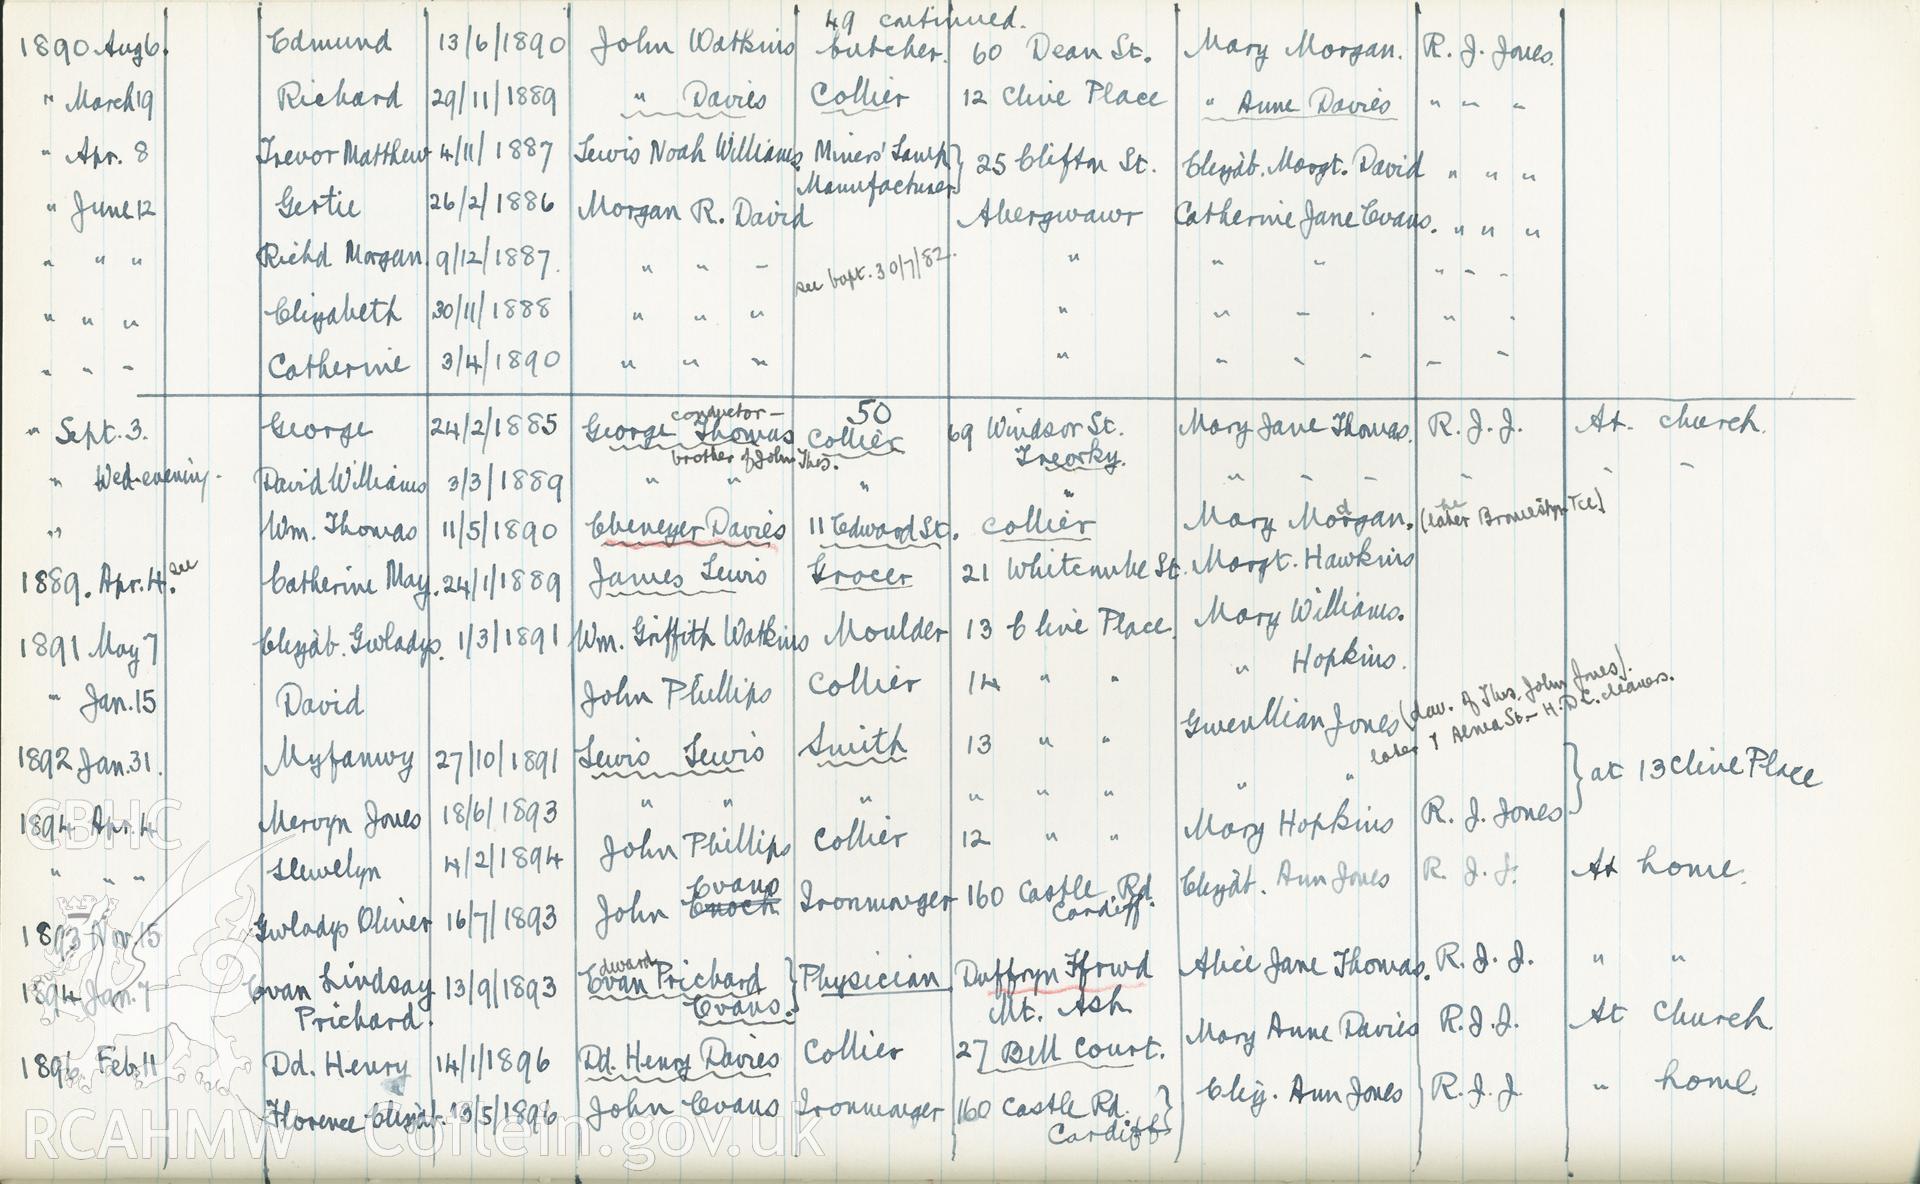 "Baptism Registered" book for Hen Dy Cwrdd, made between April 19th and 28th, 1941, by W. W. Price. Page listing baptisms from 6th August 1890 to 11th February 1896. Donated to the RCAHMW as part of the Digital Dissent Project.